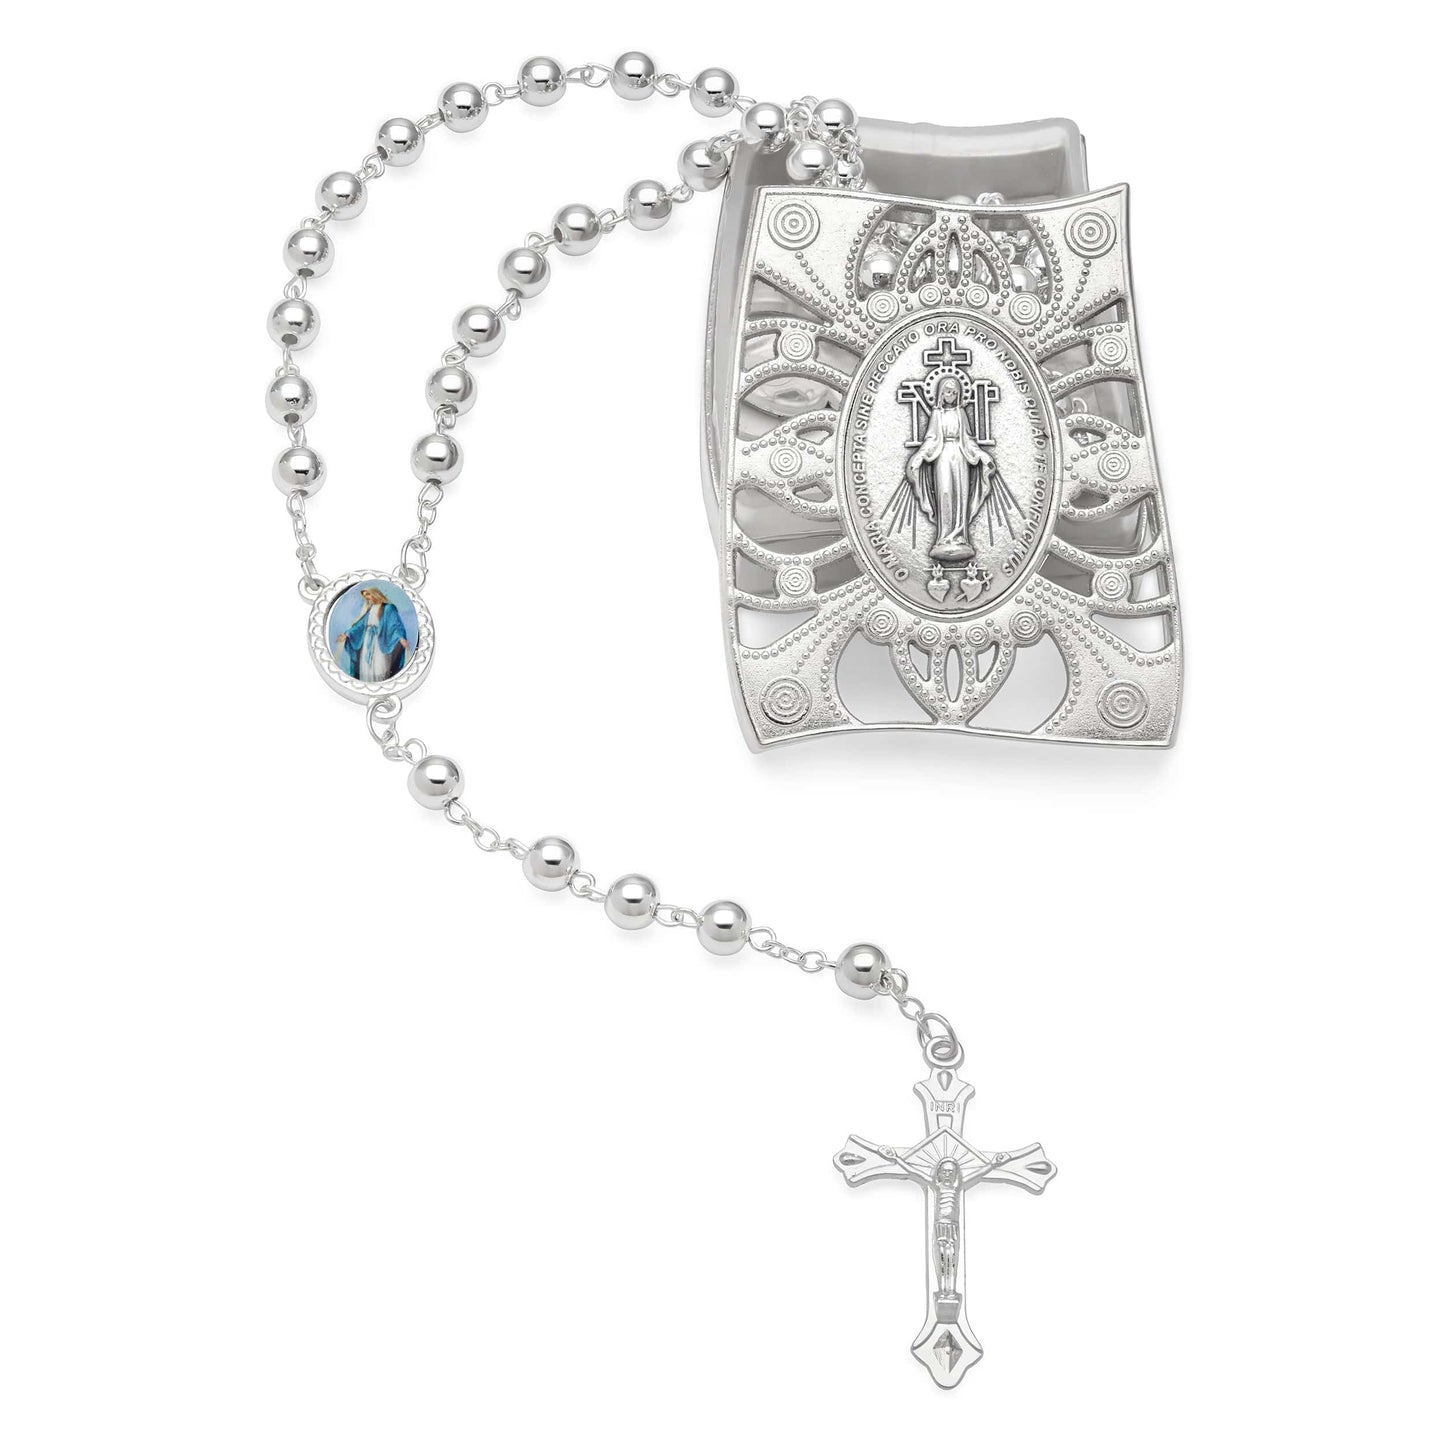 MONDO CATTOLICO Prayer Beads 51 cm (20.07 in) / 6 mm (0.23 in) Miraculous Virgin Rosary with Filigree Box